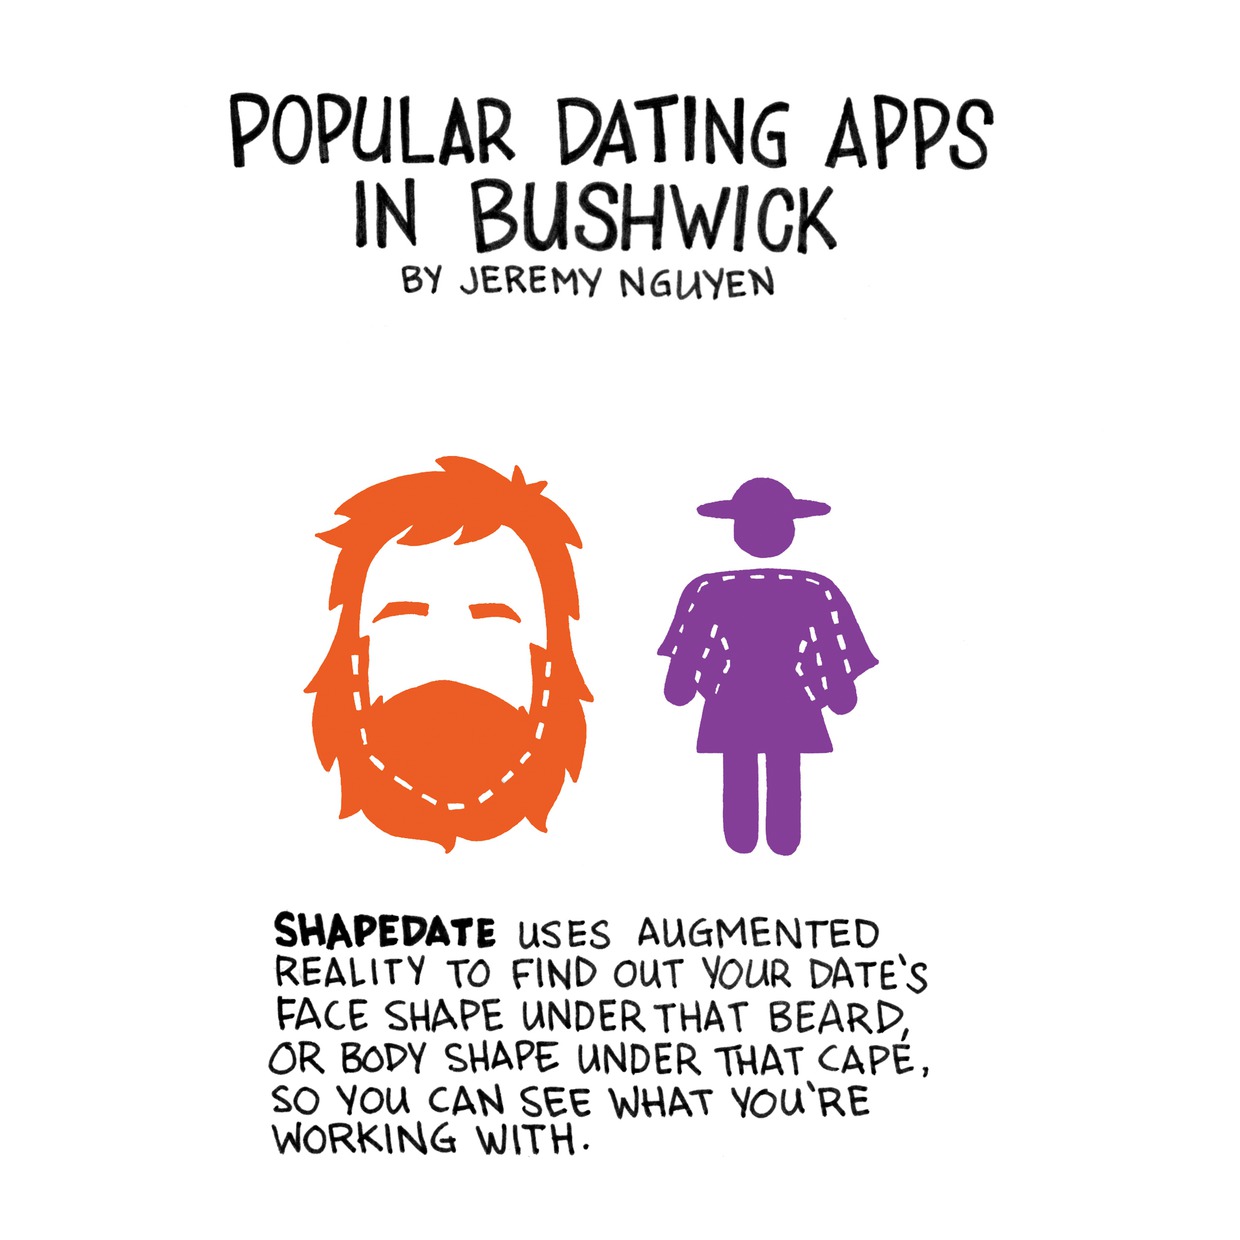 Find a Cutie with These Popular Bushwick Dating Apps [COMIC]